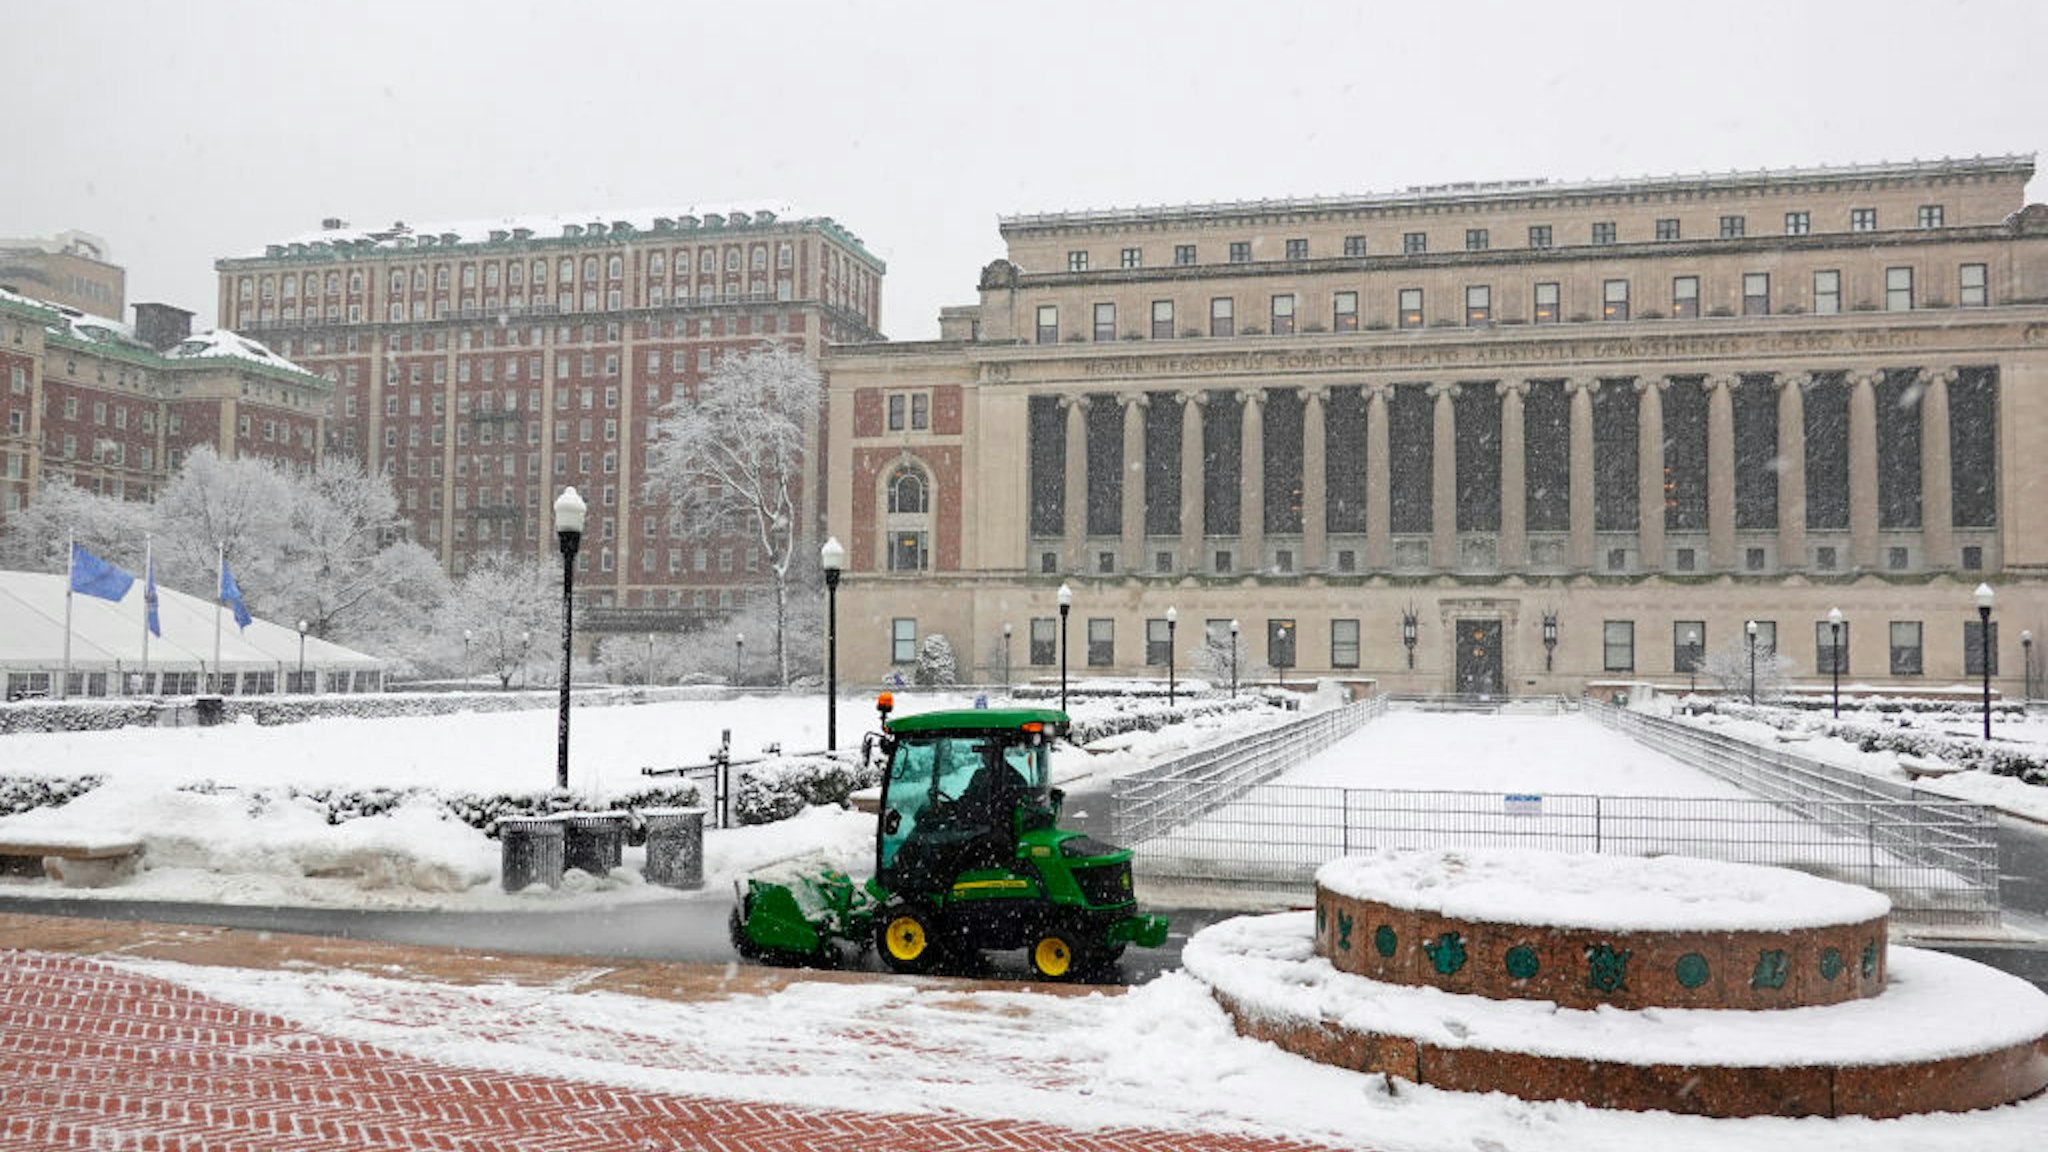 Tractor with roller brush and blower removing snow from walkways on the Columbia University campus area in New York.